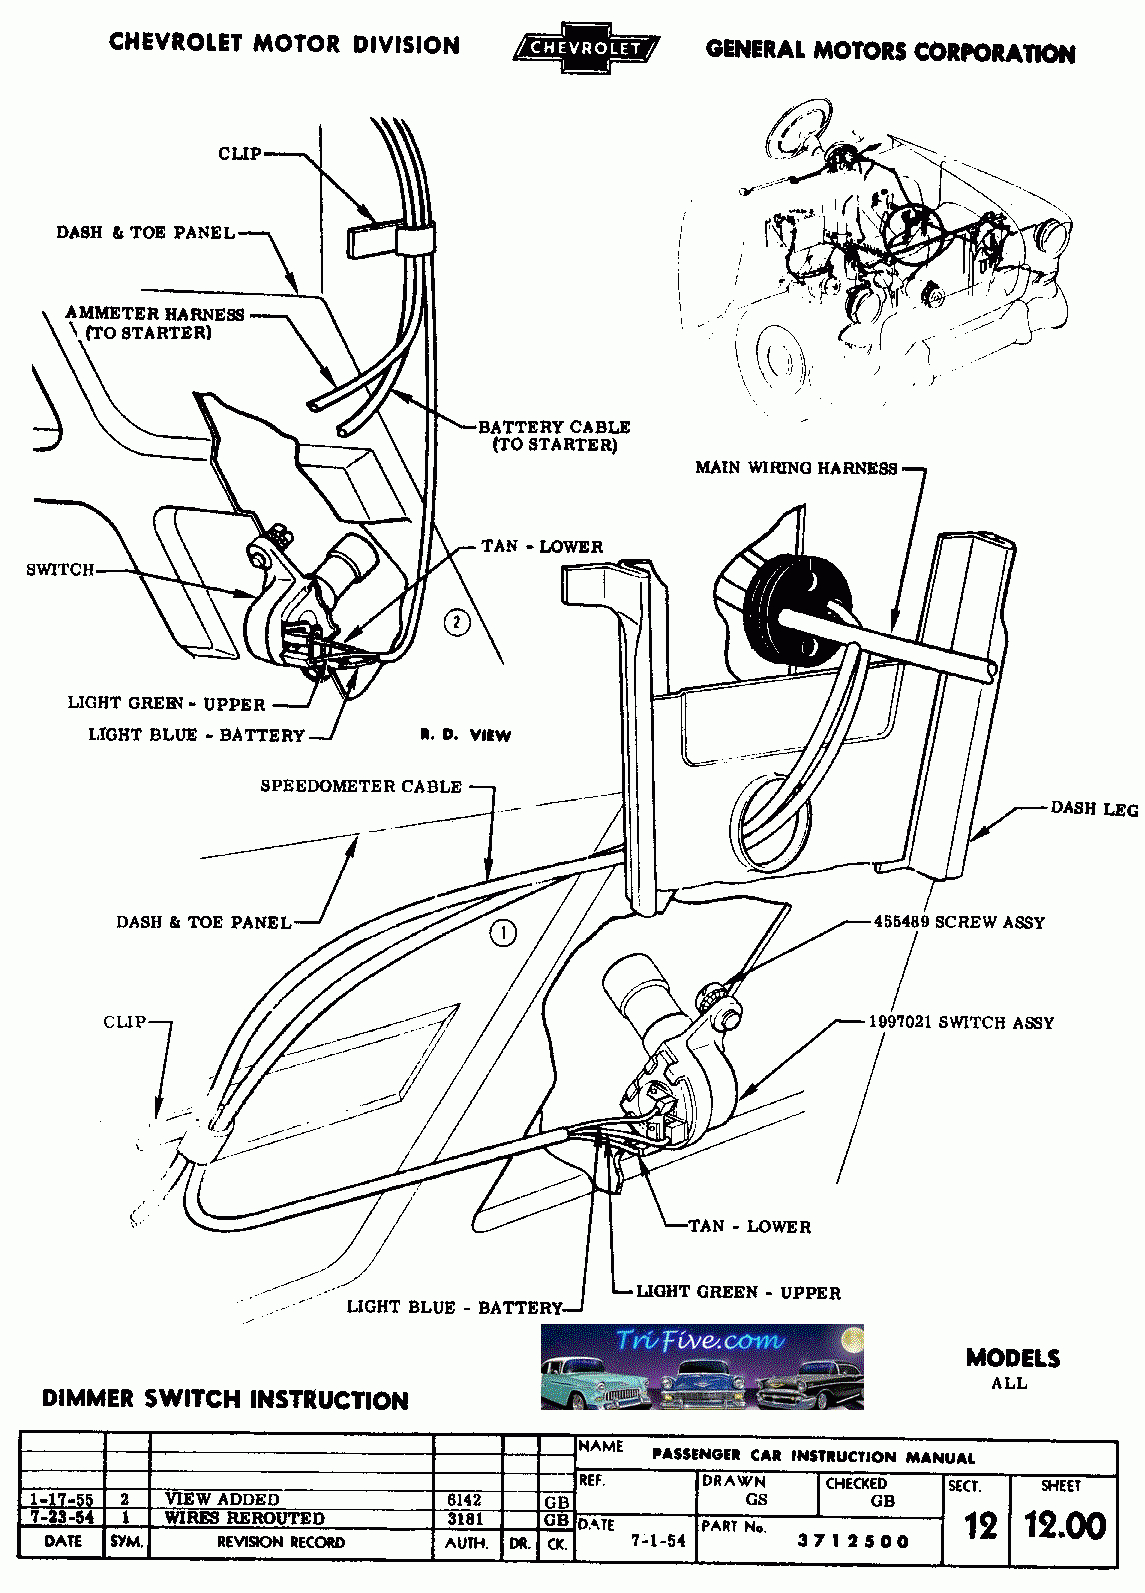 Wiring Diagram For Headlight Dimmer Switch from annawiringdiagram.com